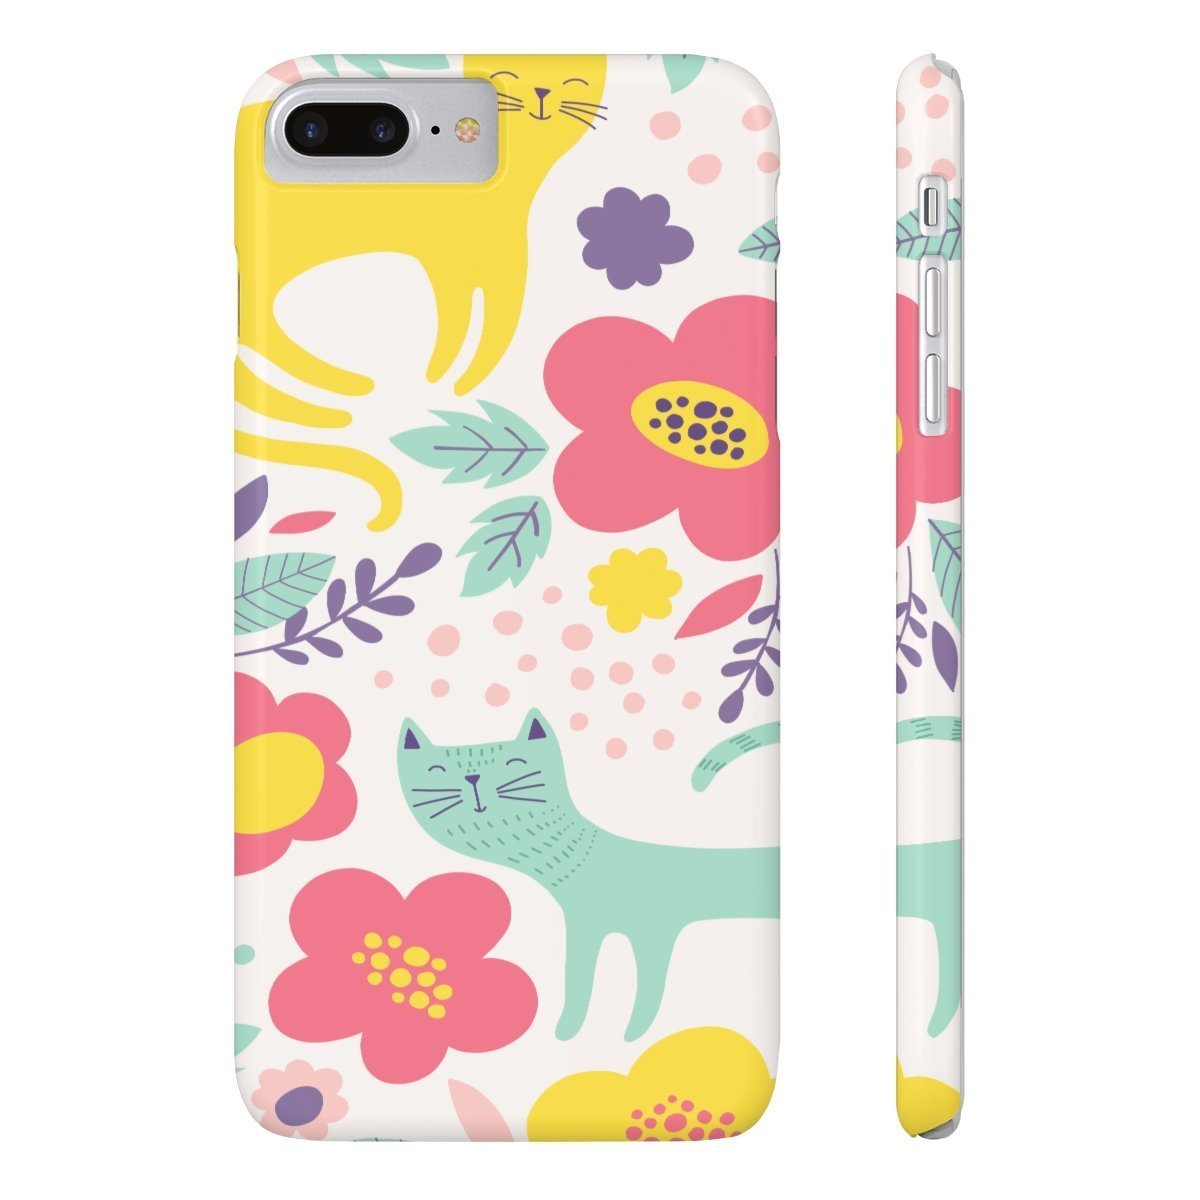 Unique Gifts for Cat Ladies, Floral Cat Phone Case Featuring a Colorful Cat Print